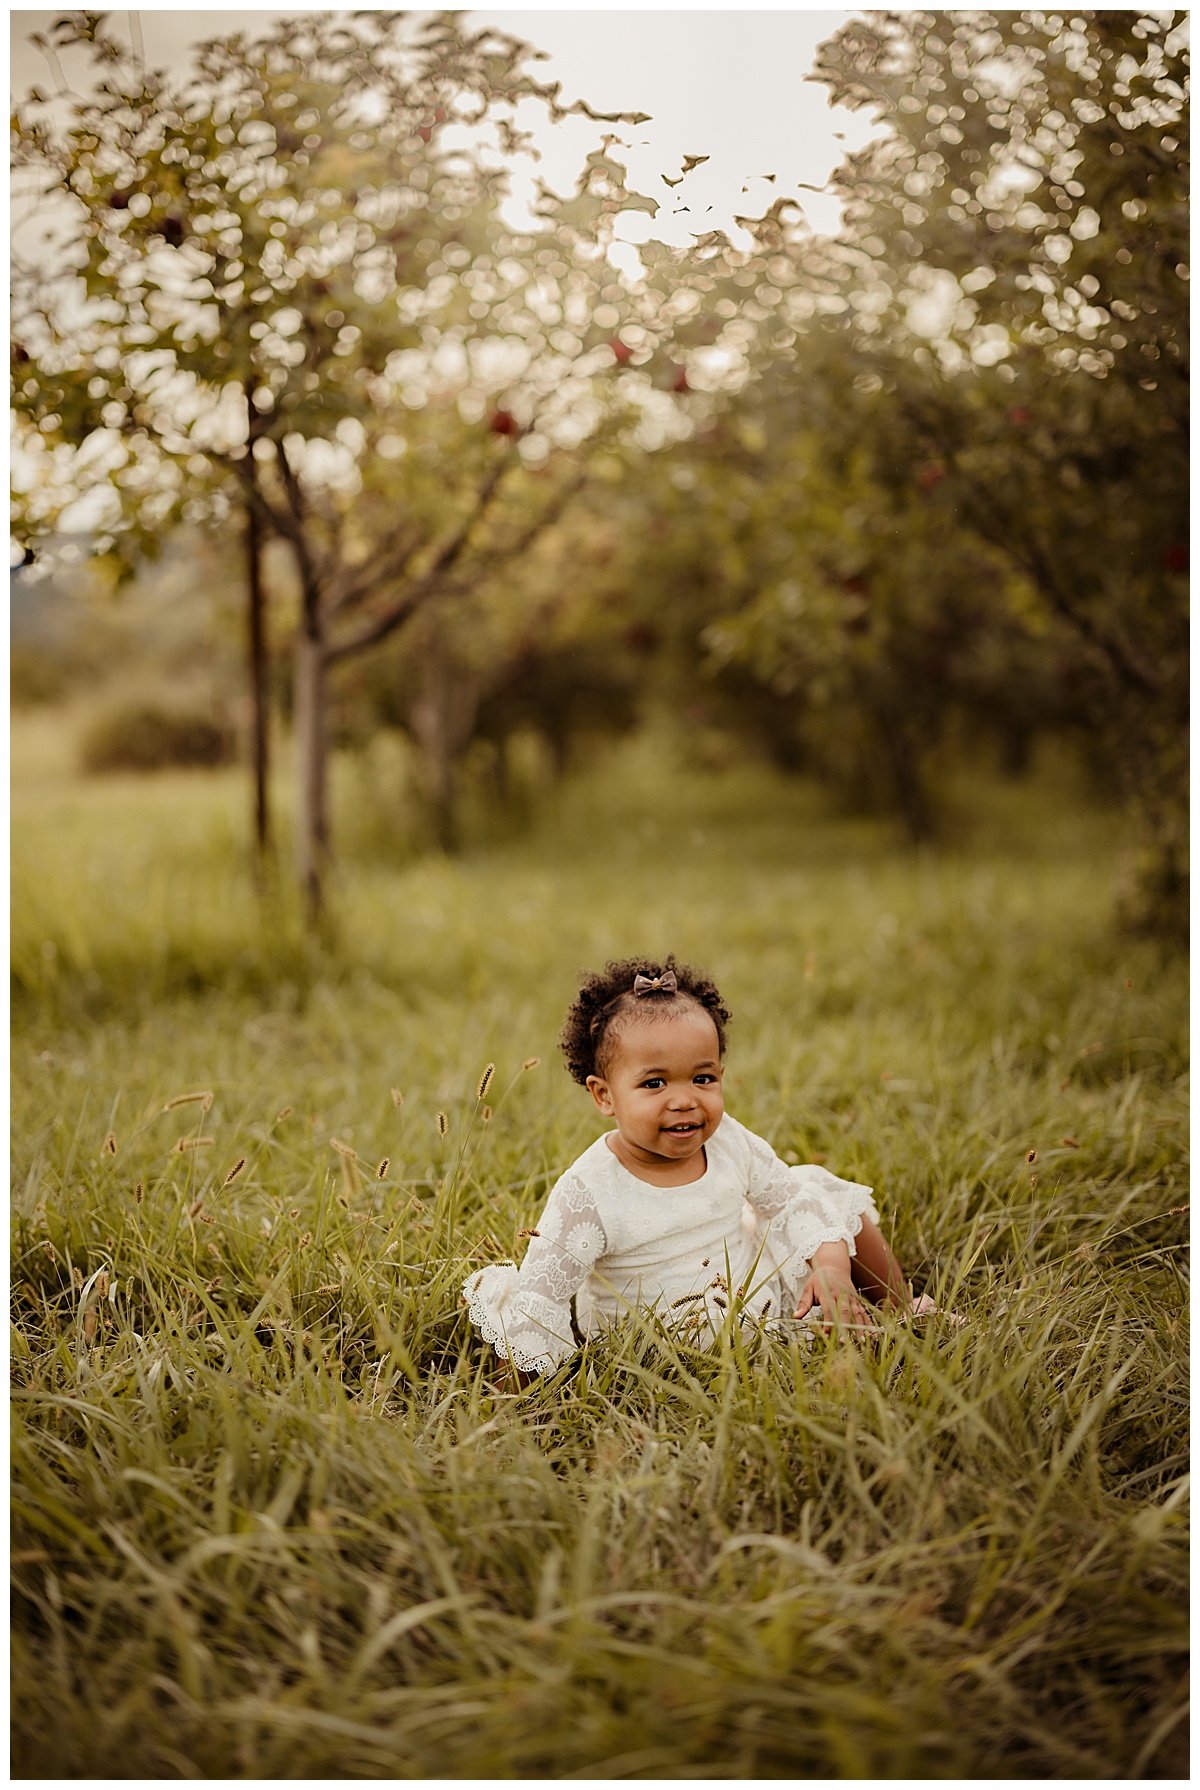 Baby girl smiles during their Outdoor Adventure Golden Hour Session at Great Country Farms